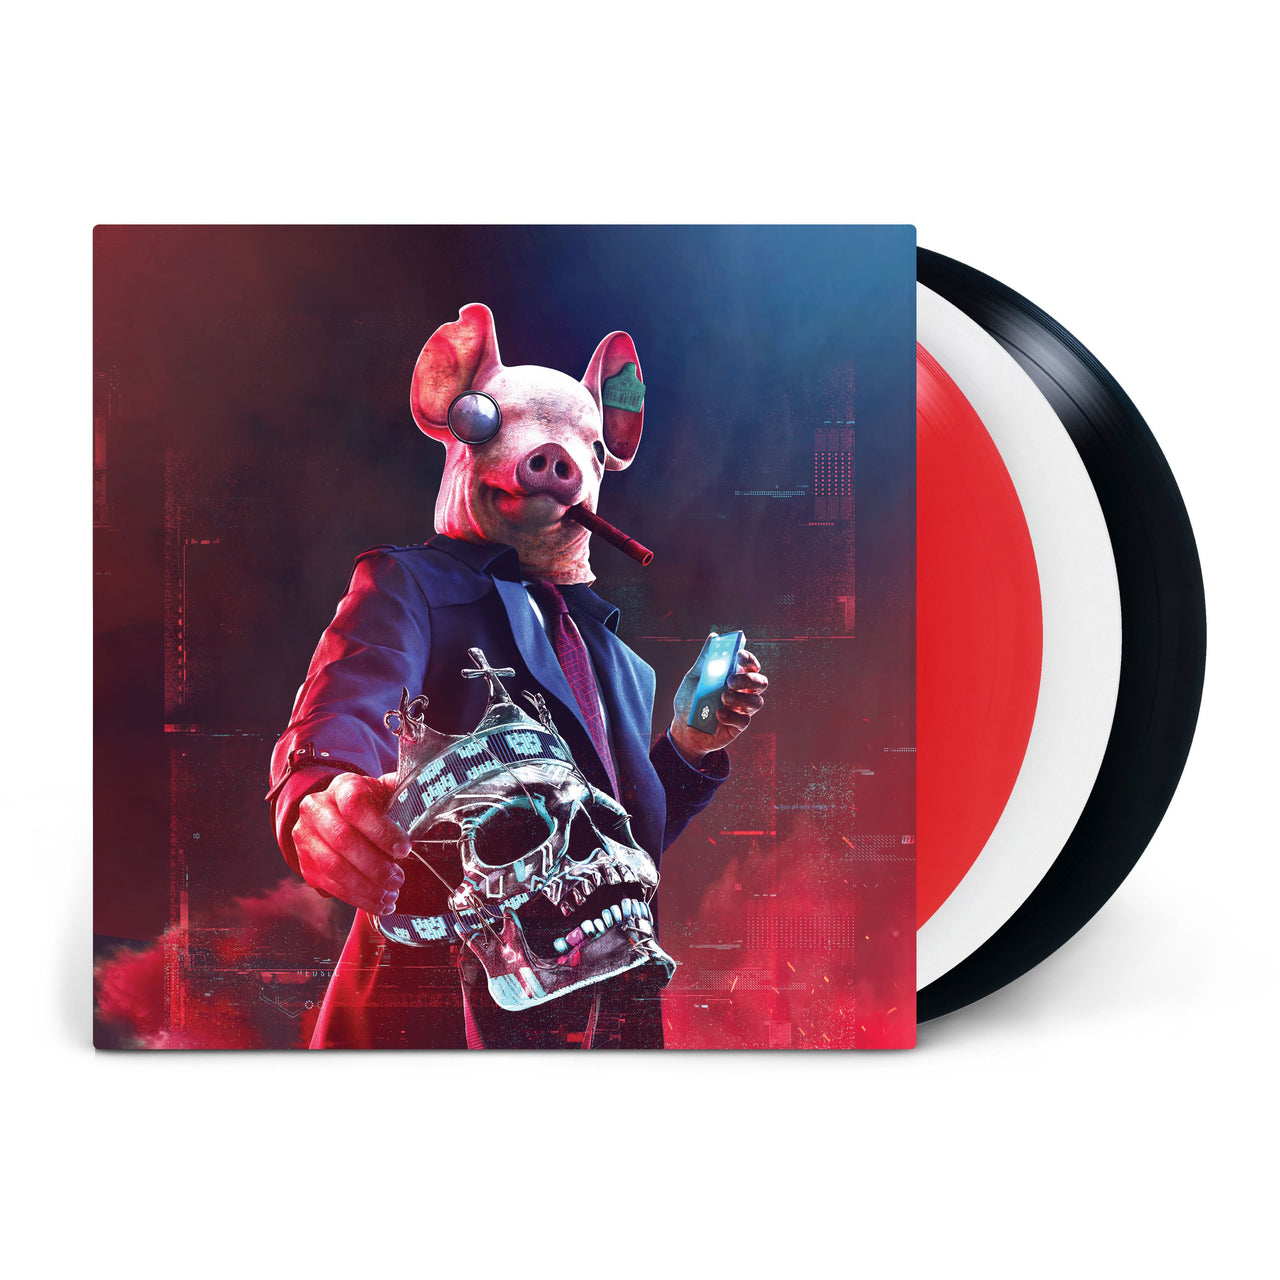 Watch Dogs: Legion (Limited Edition Deluxe Triple Vinyl)